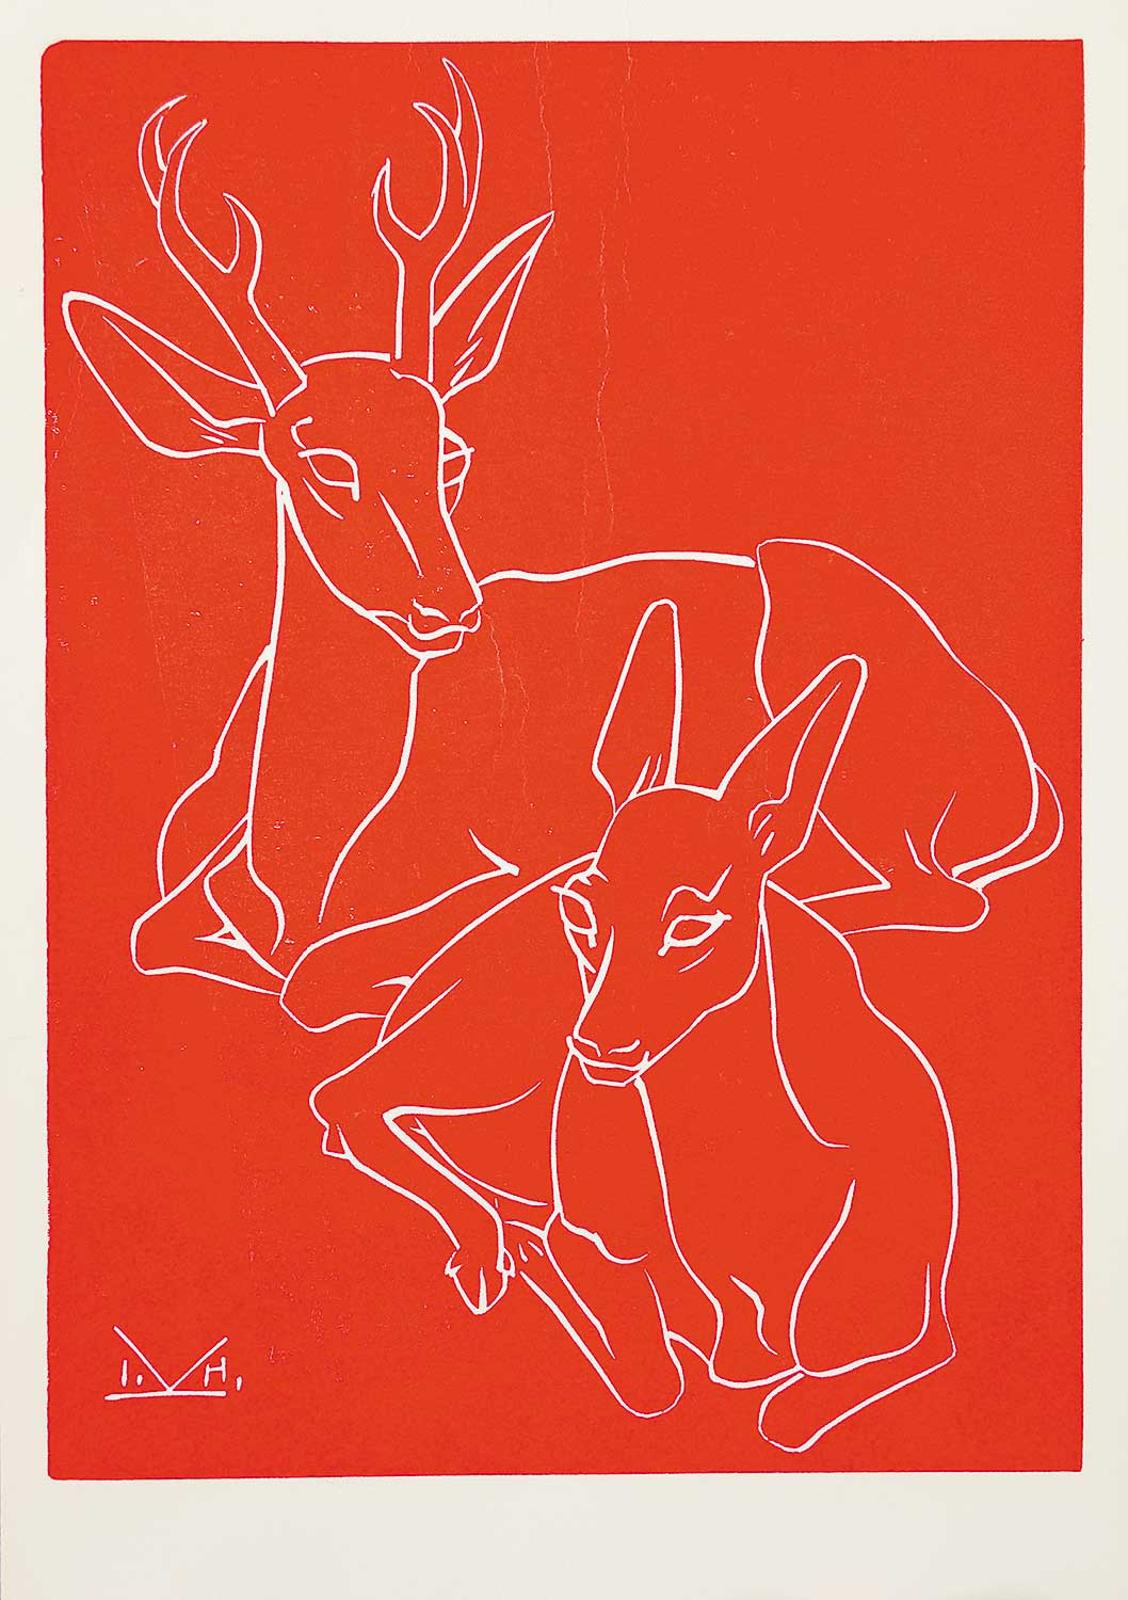 Illingworth Holey (Buck) Kerr (1905-1989) - Untitled - Stag and Doe at Rest